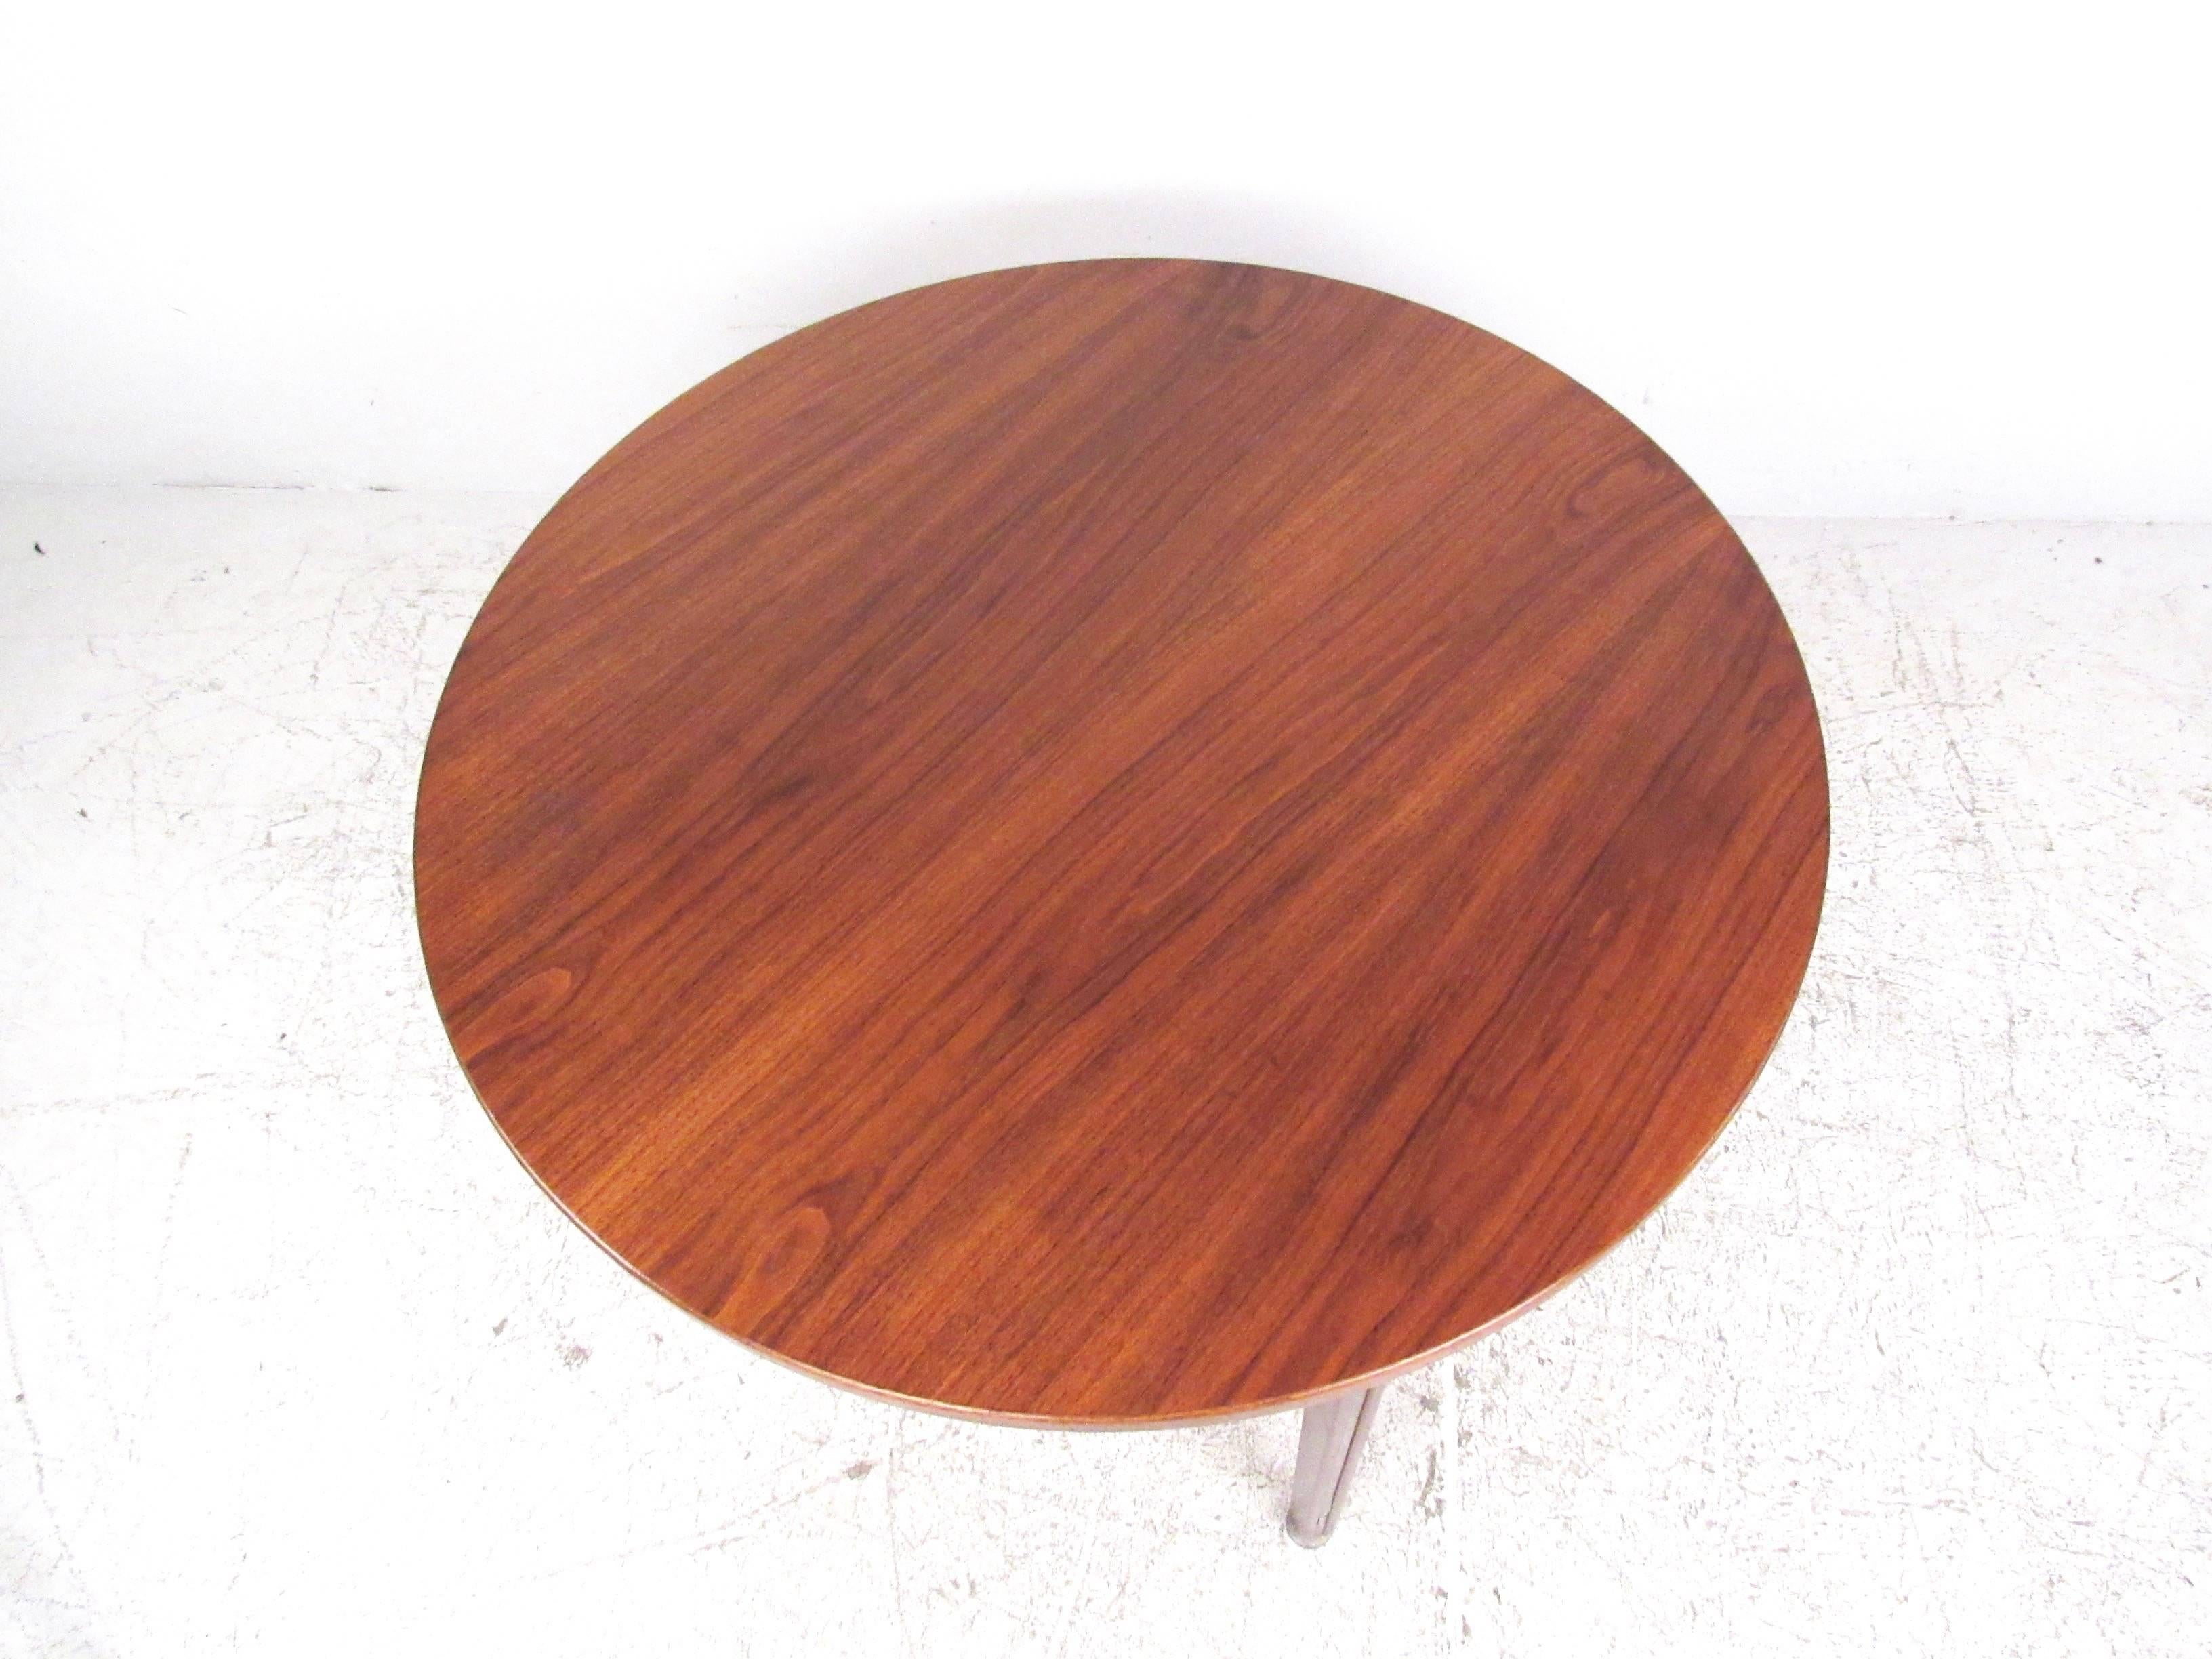 This stunning Jens Risom design dining table is constructed from beautiful Mid-Century teak. Iconic yet practical Danish design makes this a stunning table perfect for home or business use. Three leg design is complimented by aluminum trim and rich